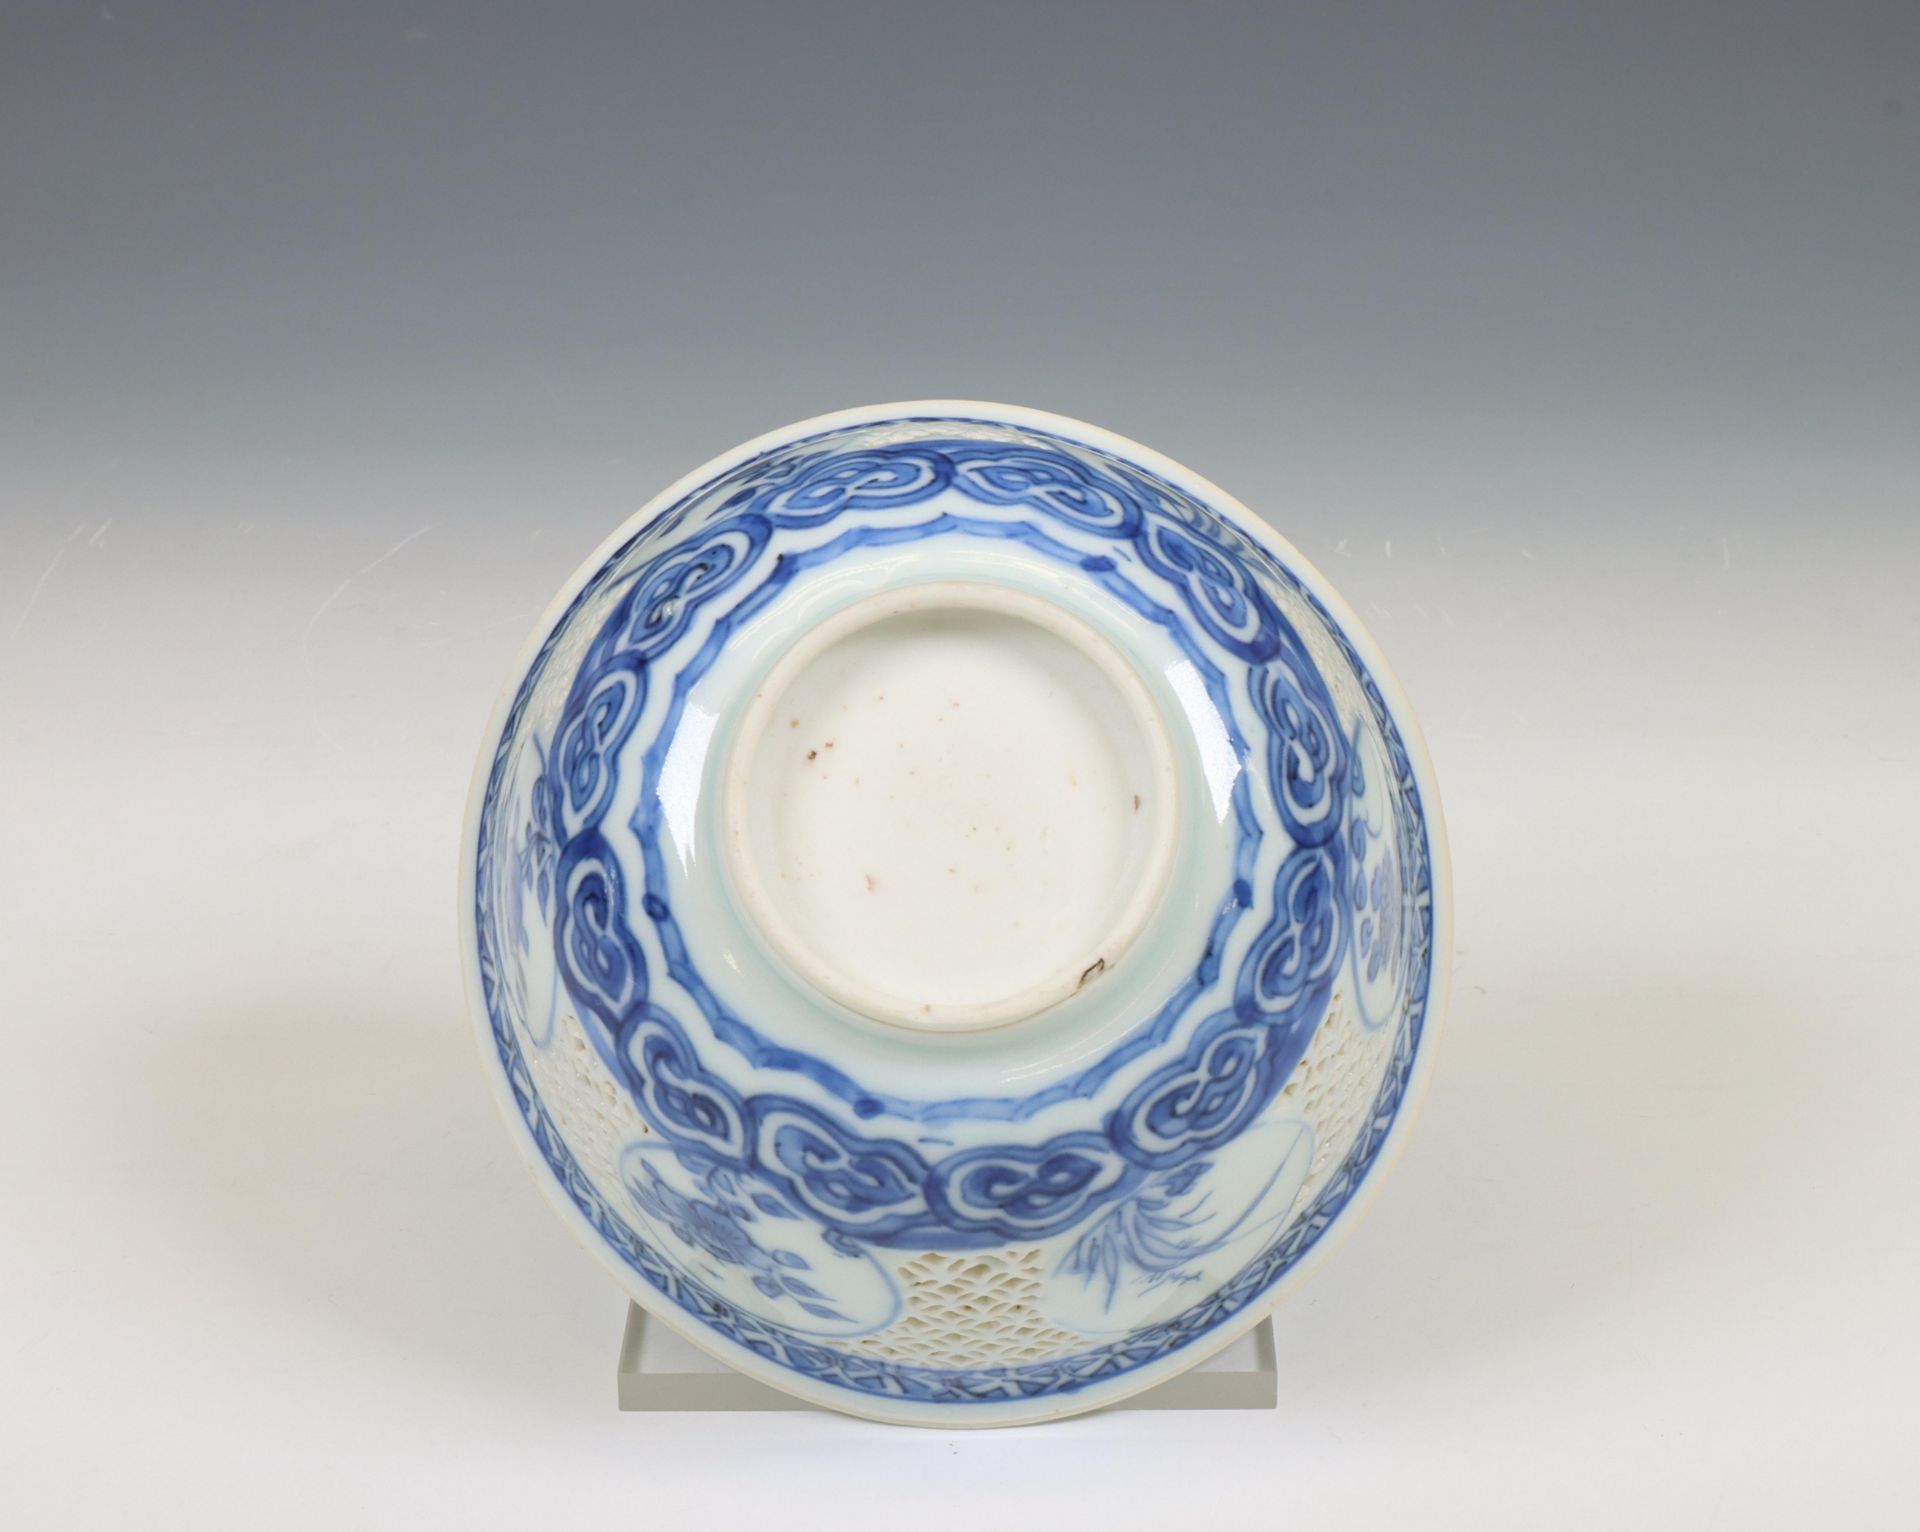 China, a blue and white porcelain openworked bowl, 18th century, - Image 5 of 6